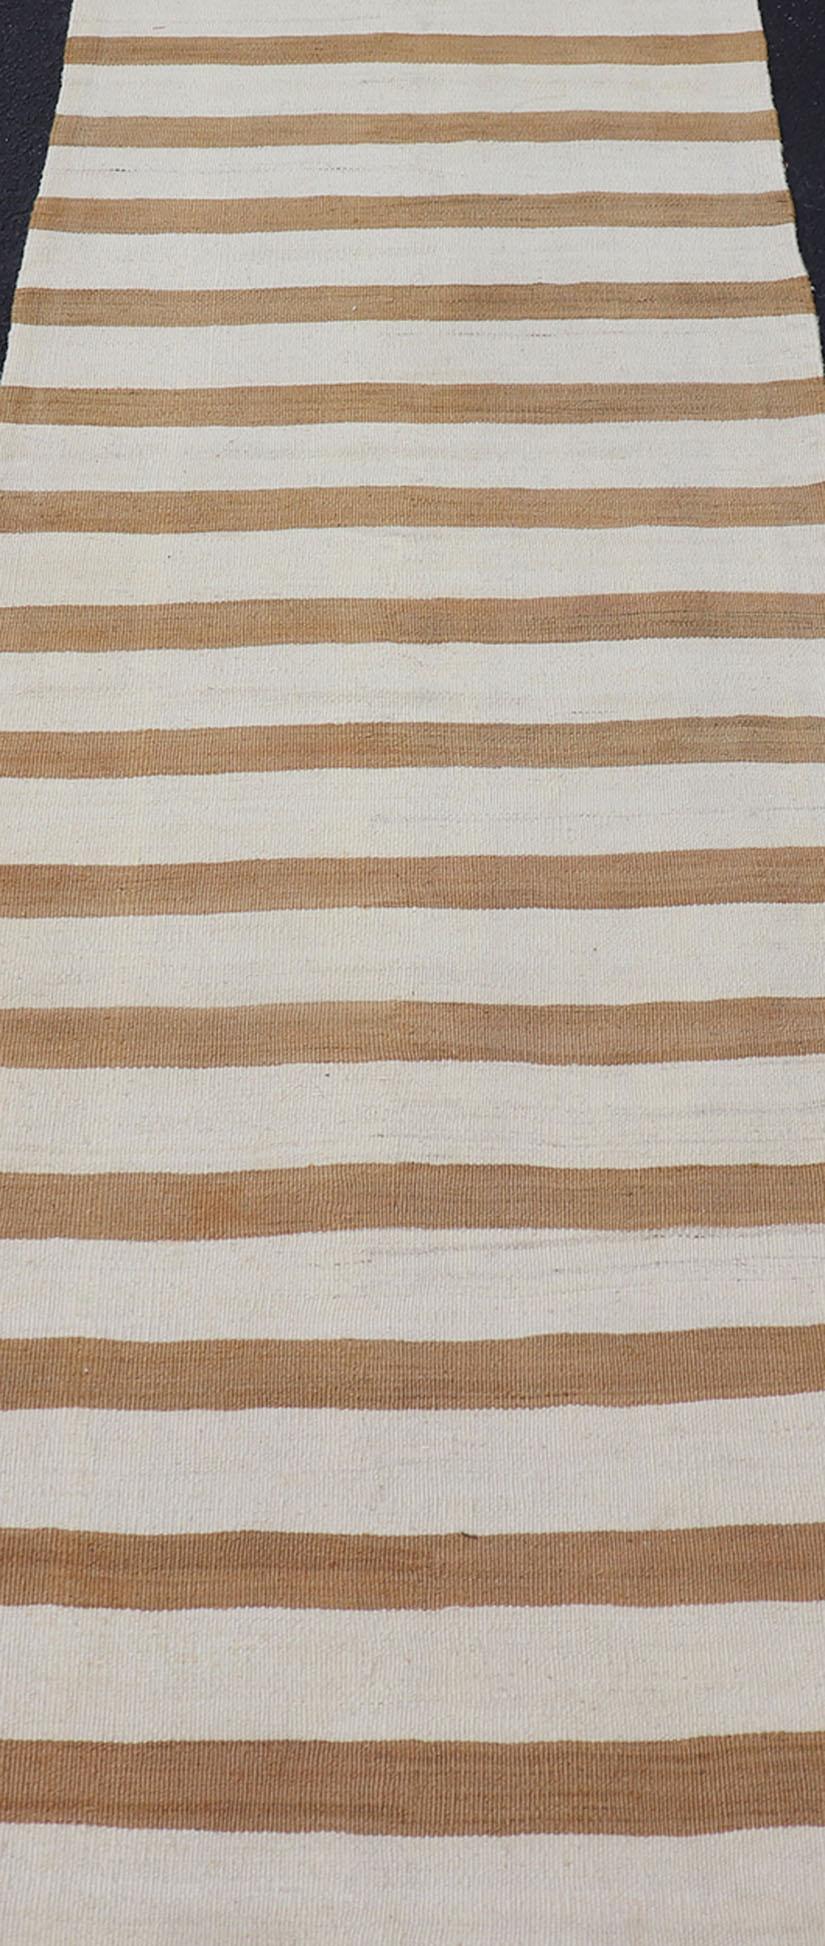 Vintage Turkish Kilim Rug with Horizontal Stripes in Light Brown and Cream For Sale 1